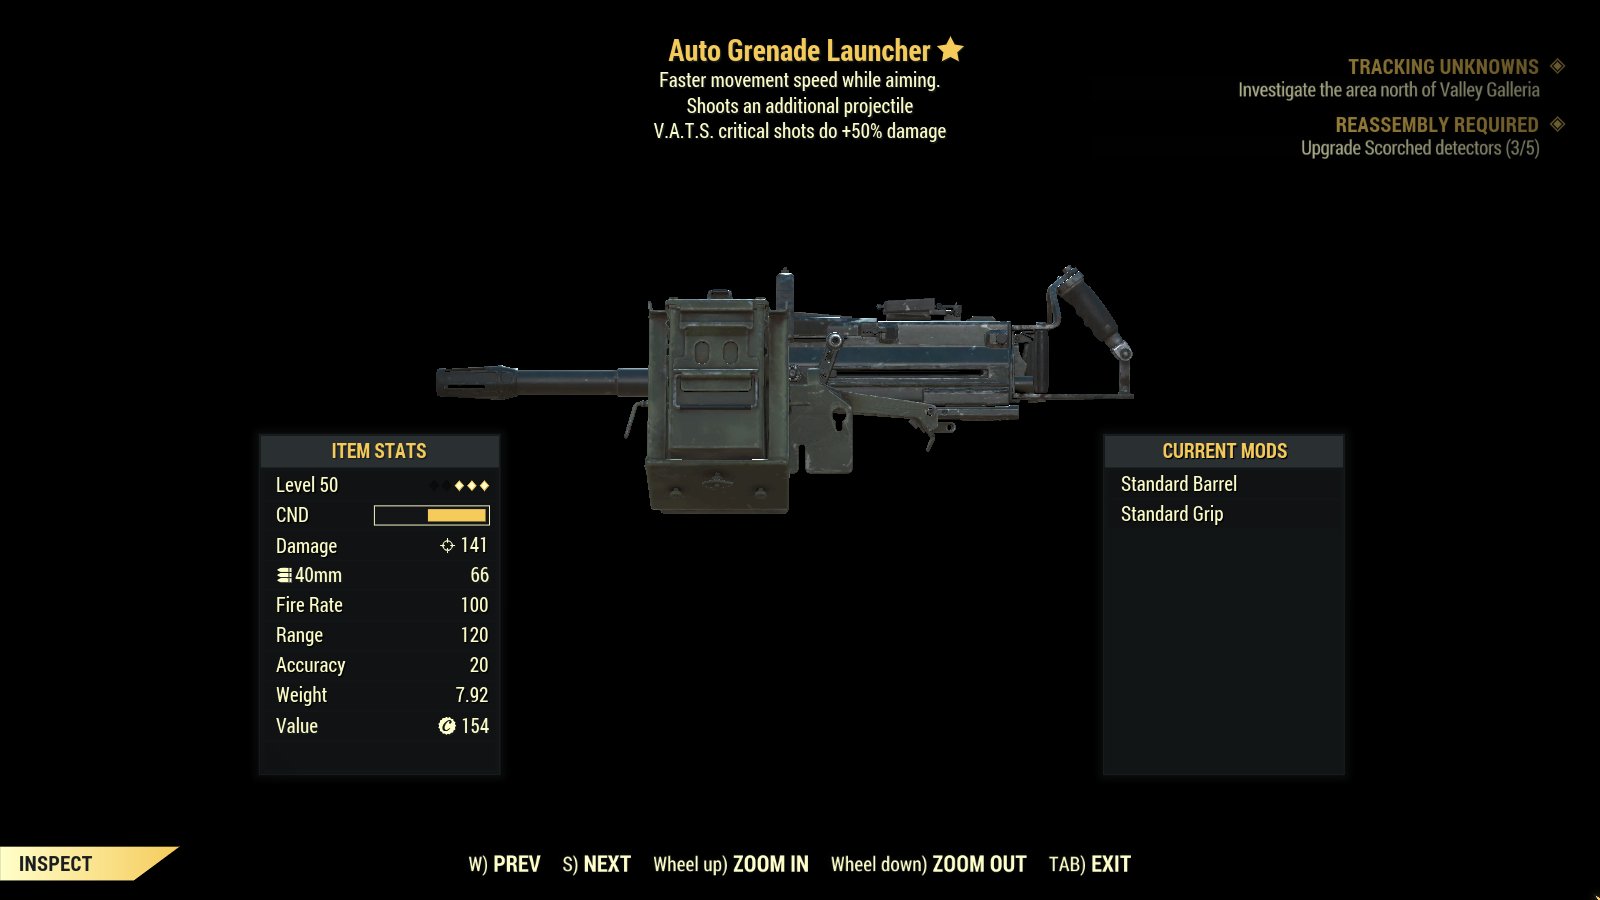 I found an automatic grenade launcher that fires two grenades at once after...